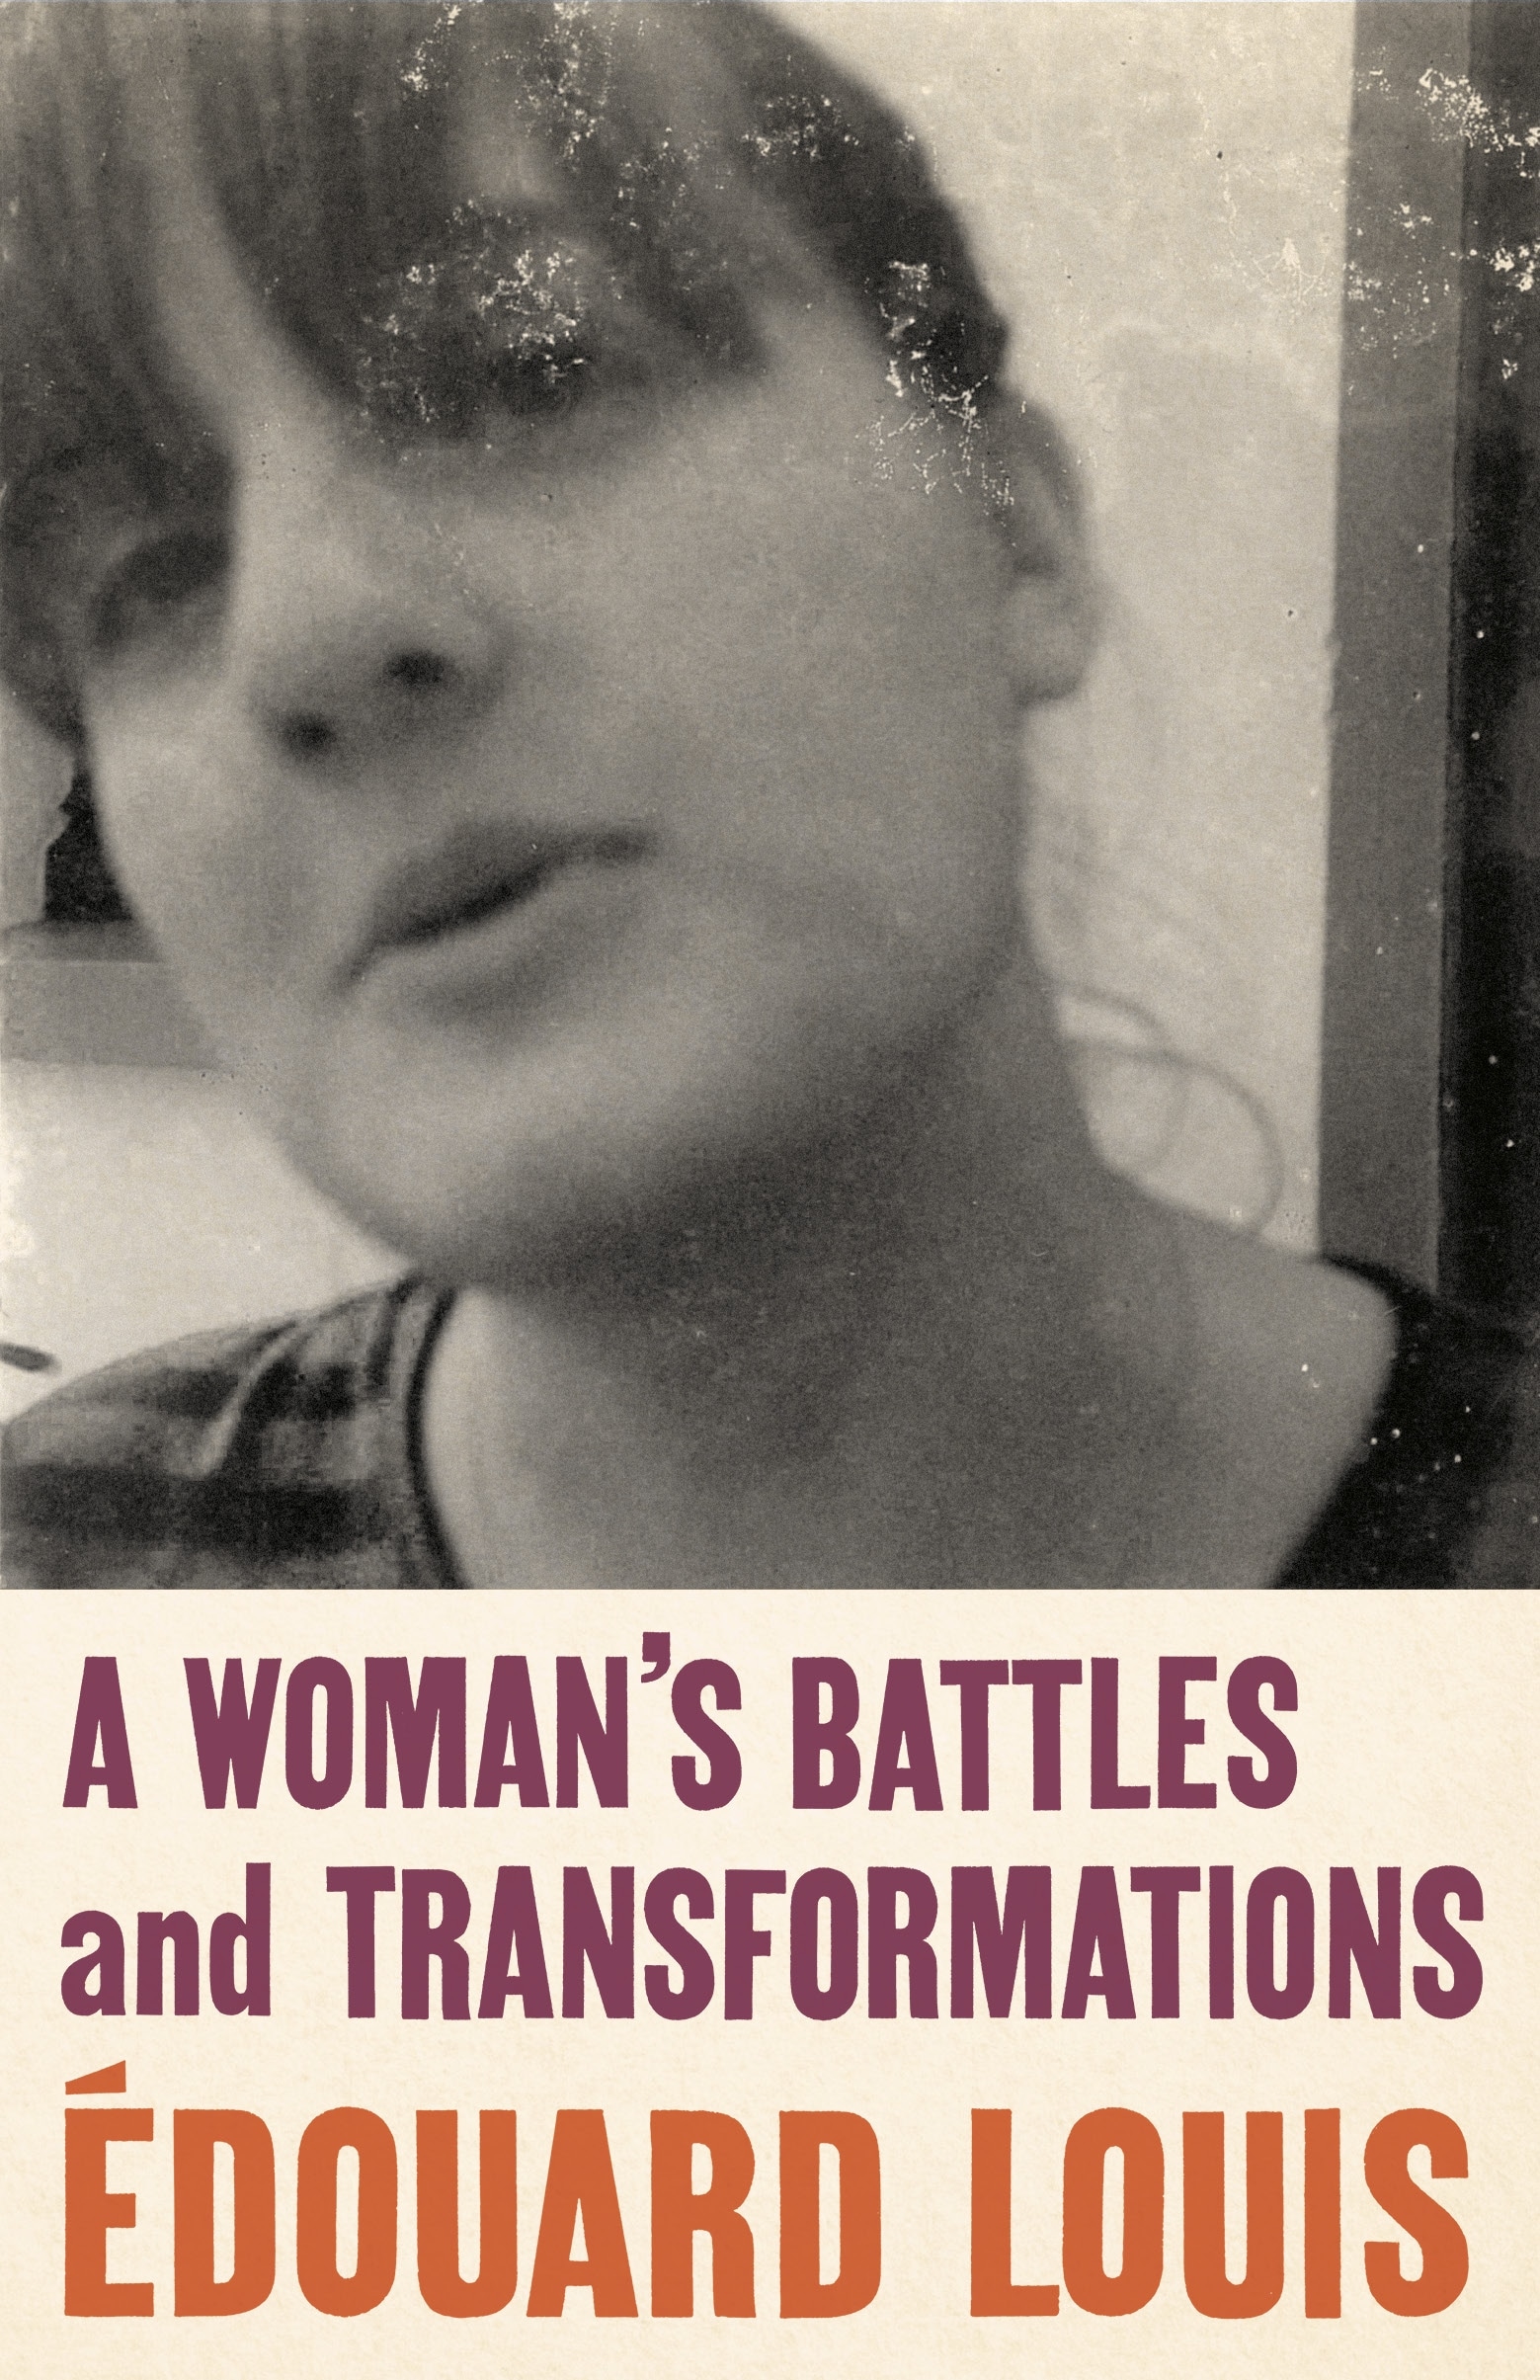 Book “A Woman’s Battles and Transformations” by Edouard Louis — July 7, 2022